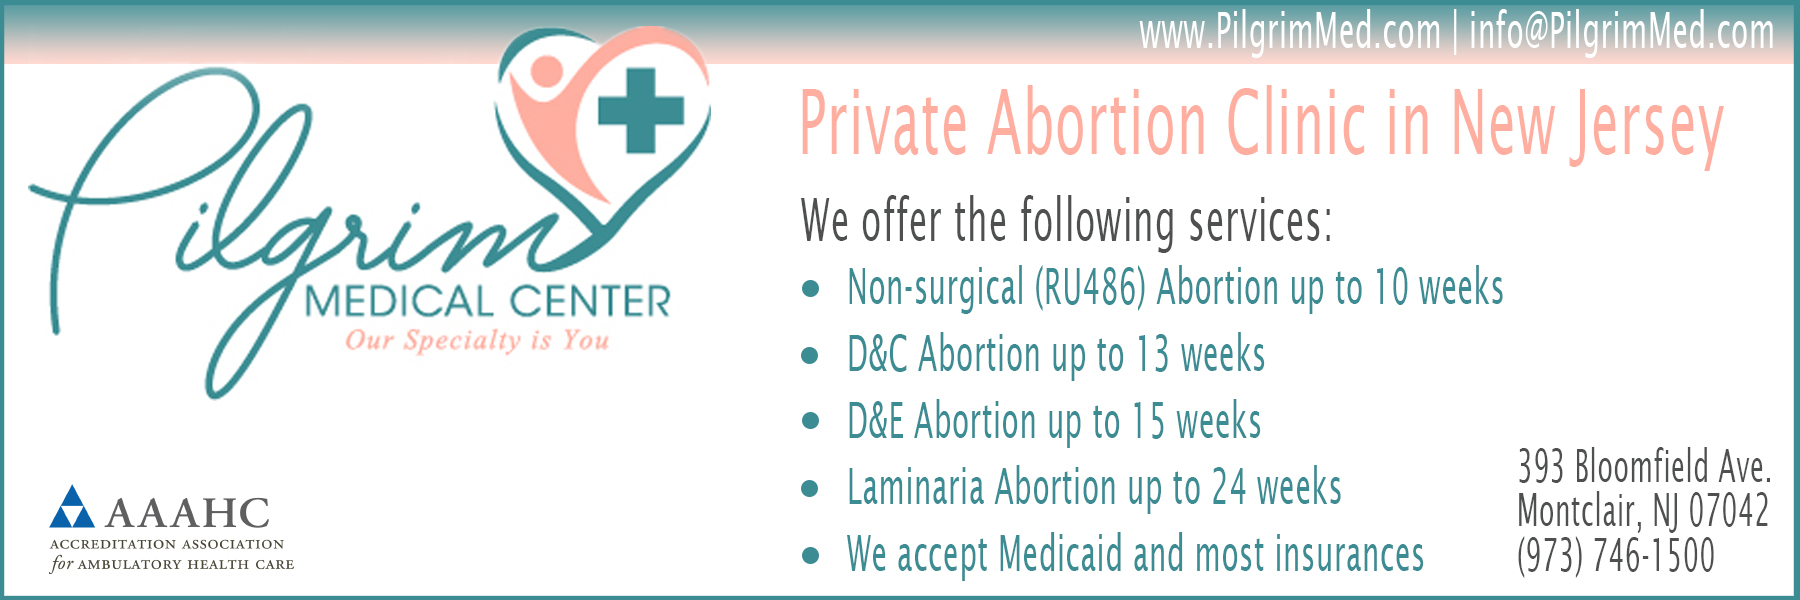 Pilgrim Medical Center - abortion clinic in New Jersey offering Abortion Pill, surgical abortions, in-clinic abortion